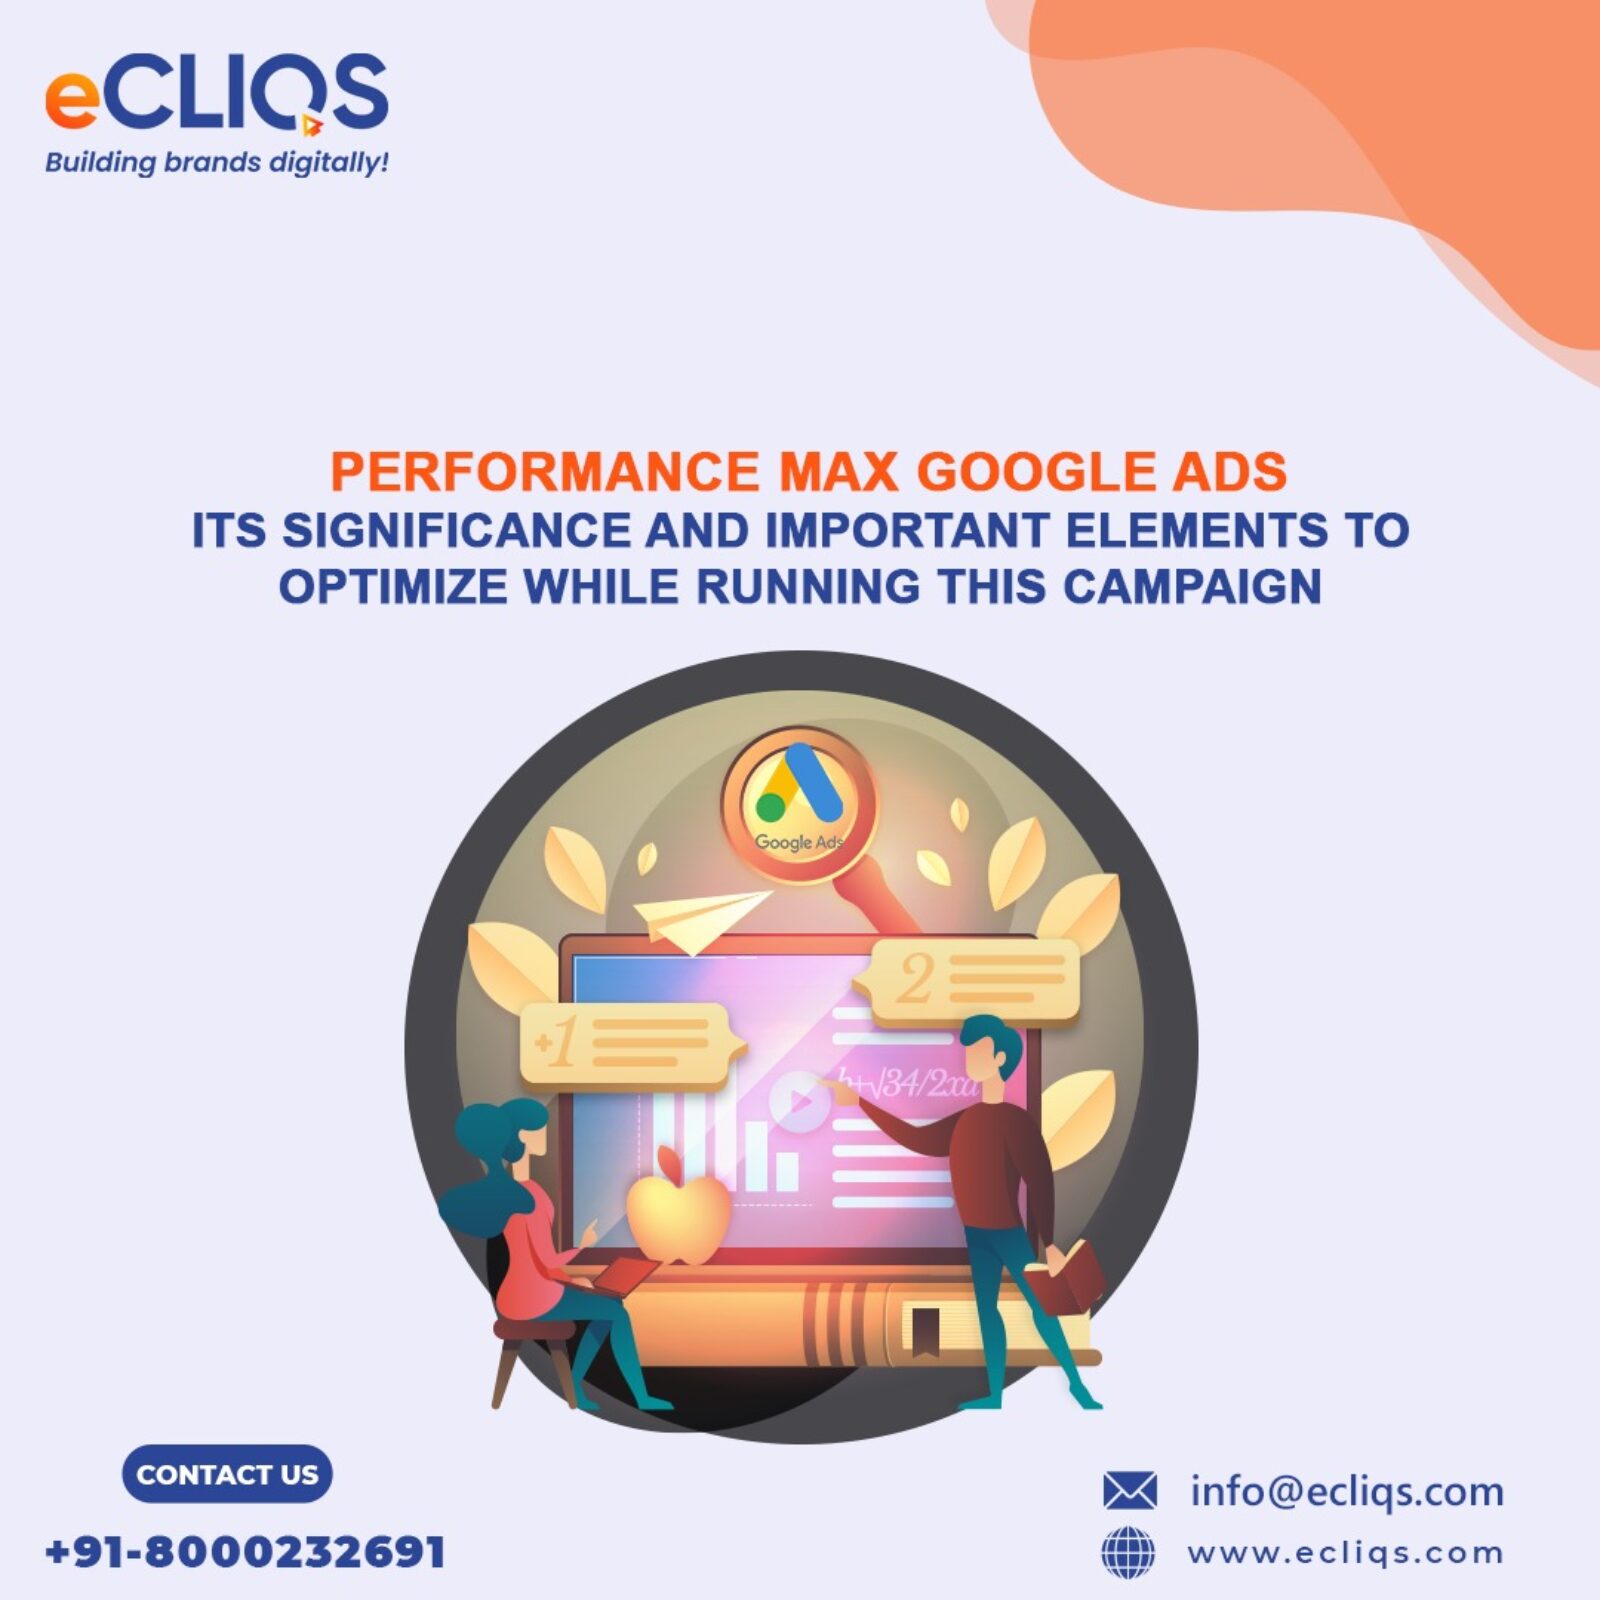 Performance Max Google Ads – Its significance and important elements to optimize while running this campaign